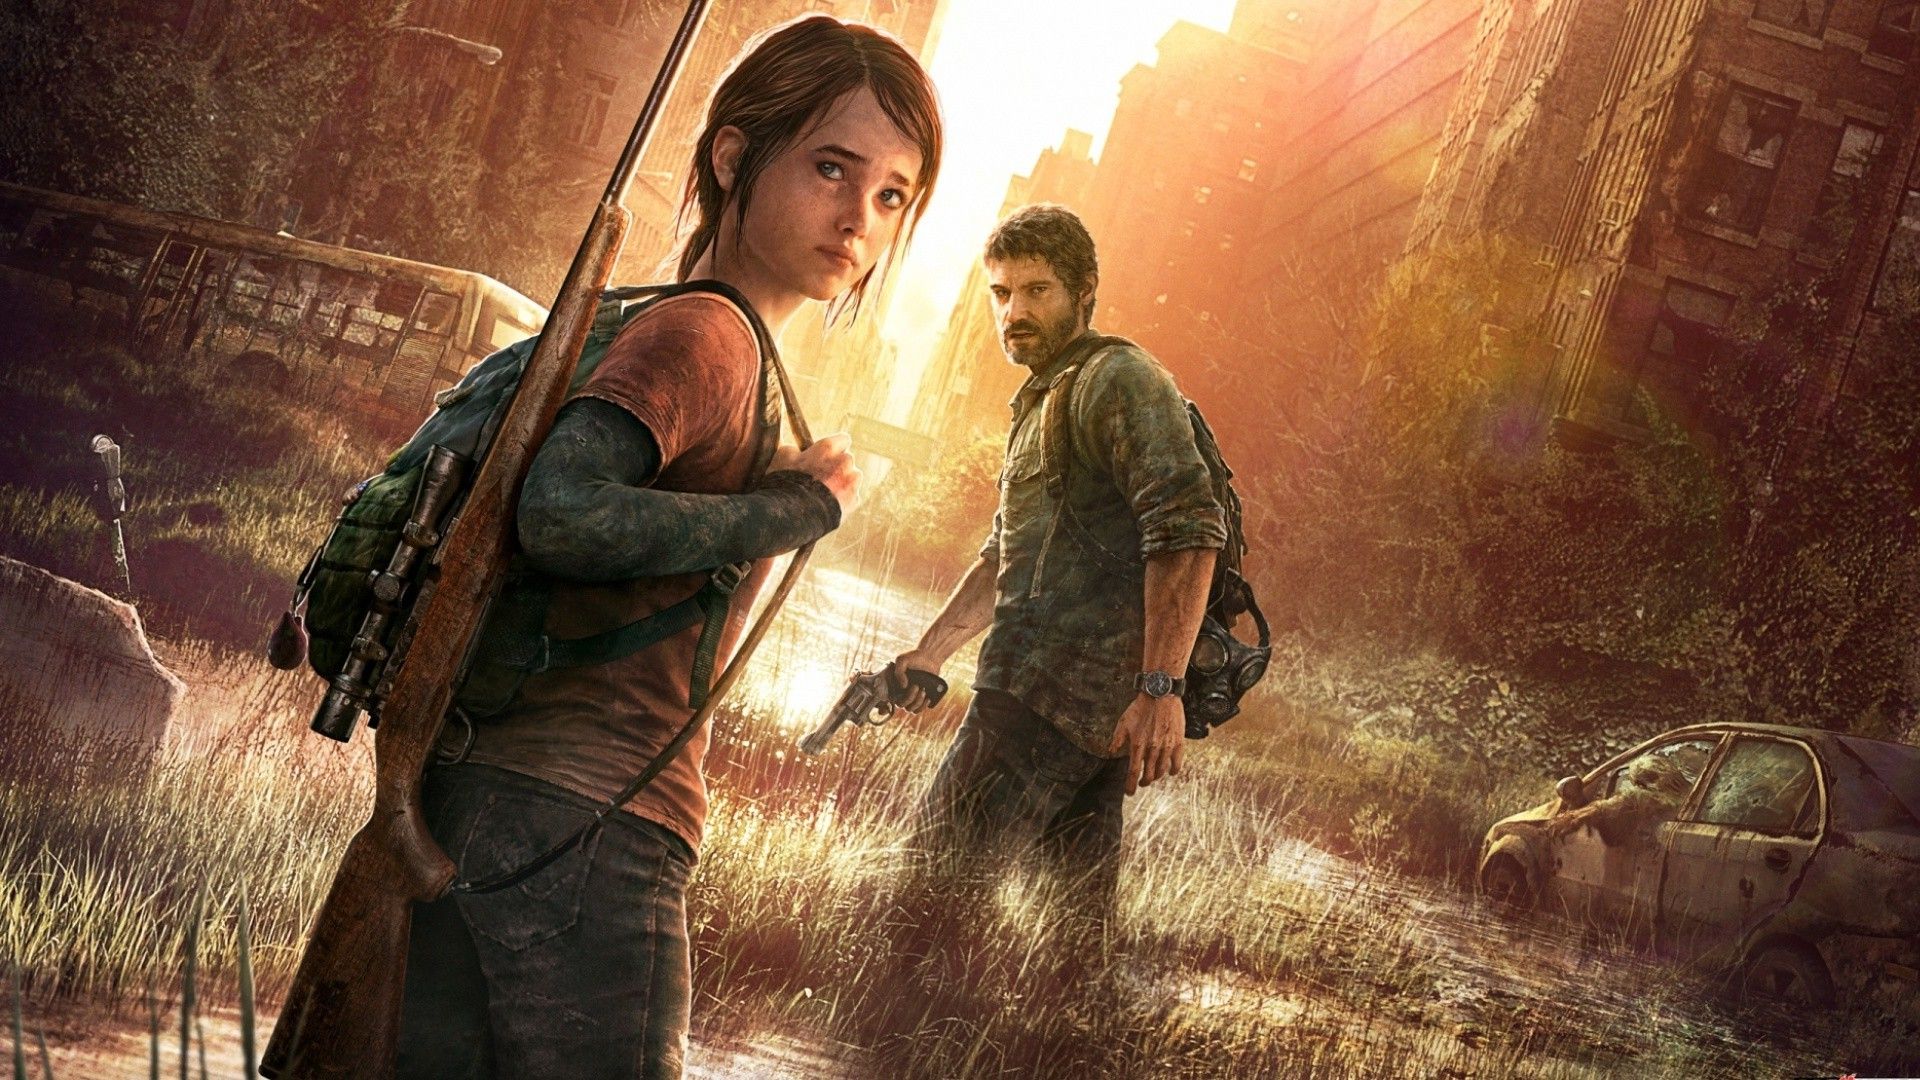 HD desktop wallpaper: Video Game, The Last Of Us, Ellie (The Last Of Us),  Joel (The Last Of Us) download free picture #956171